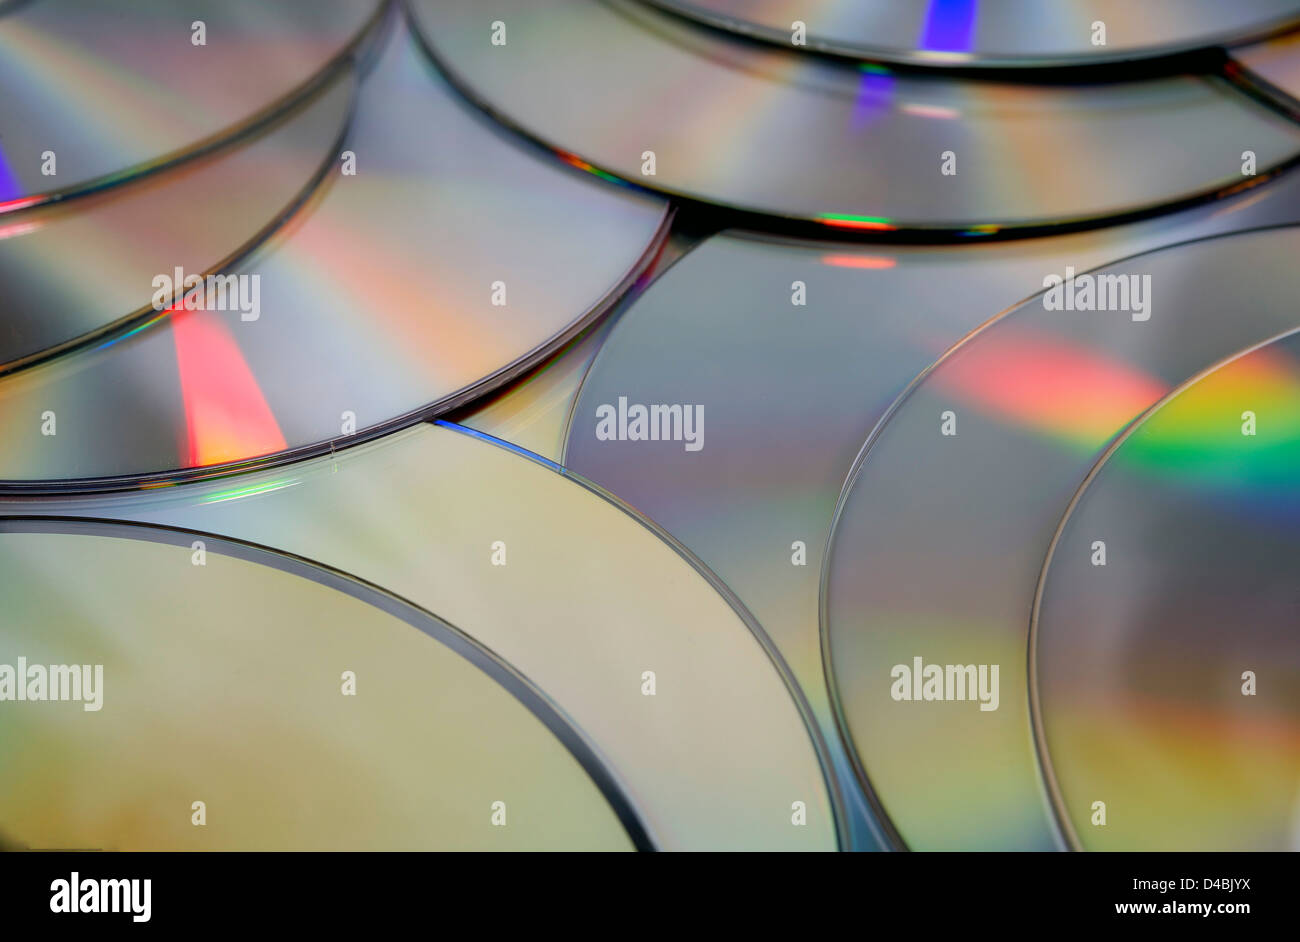 Compact Disc Texture. DVD and CD background. Stock Photo